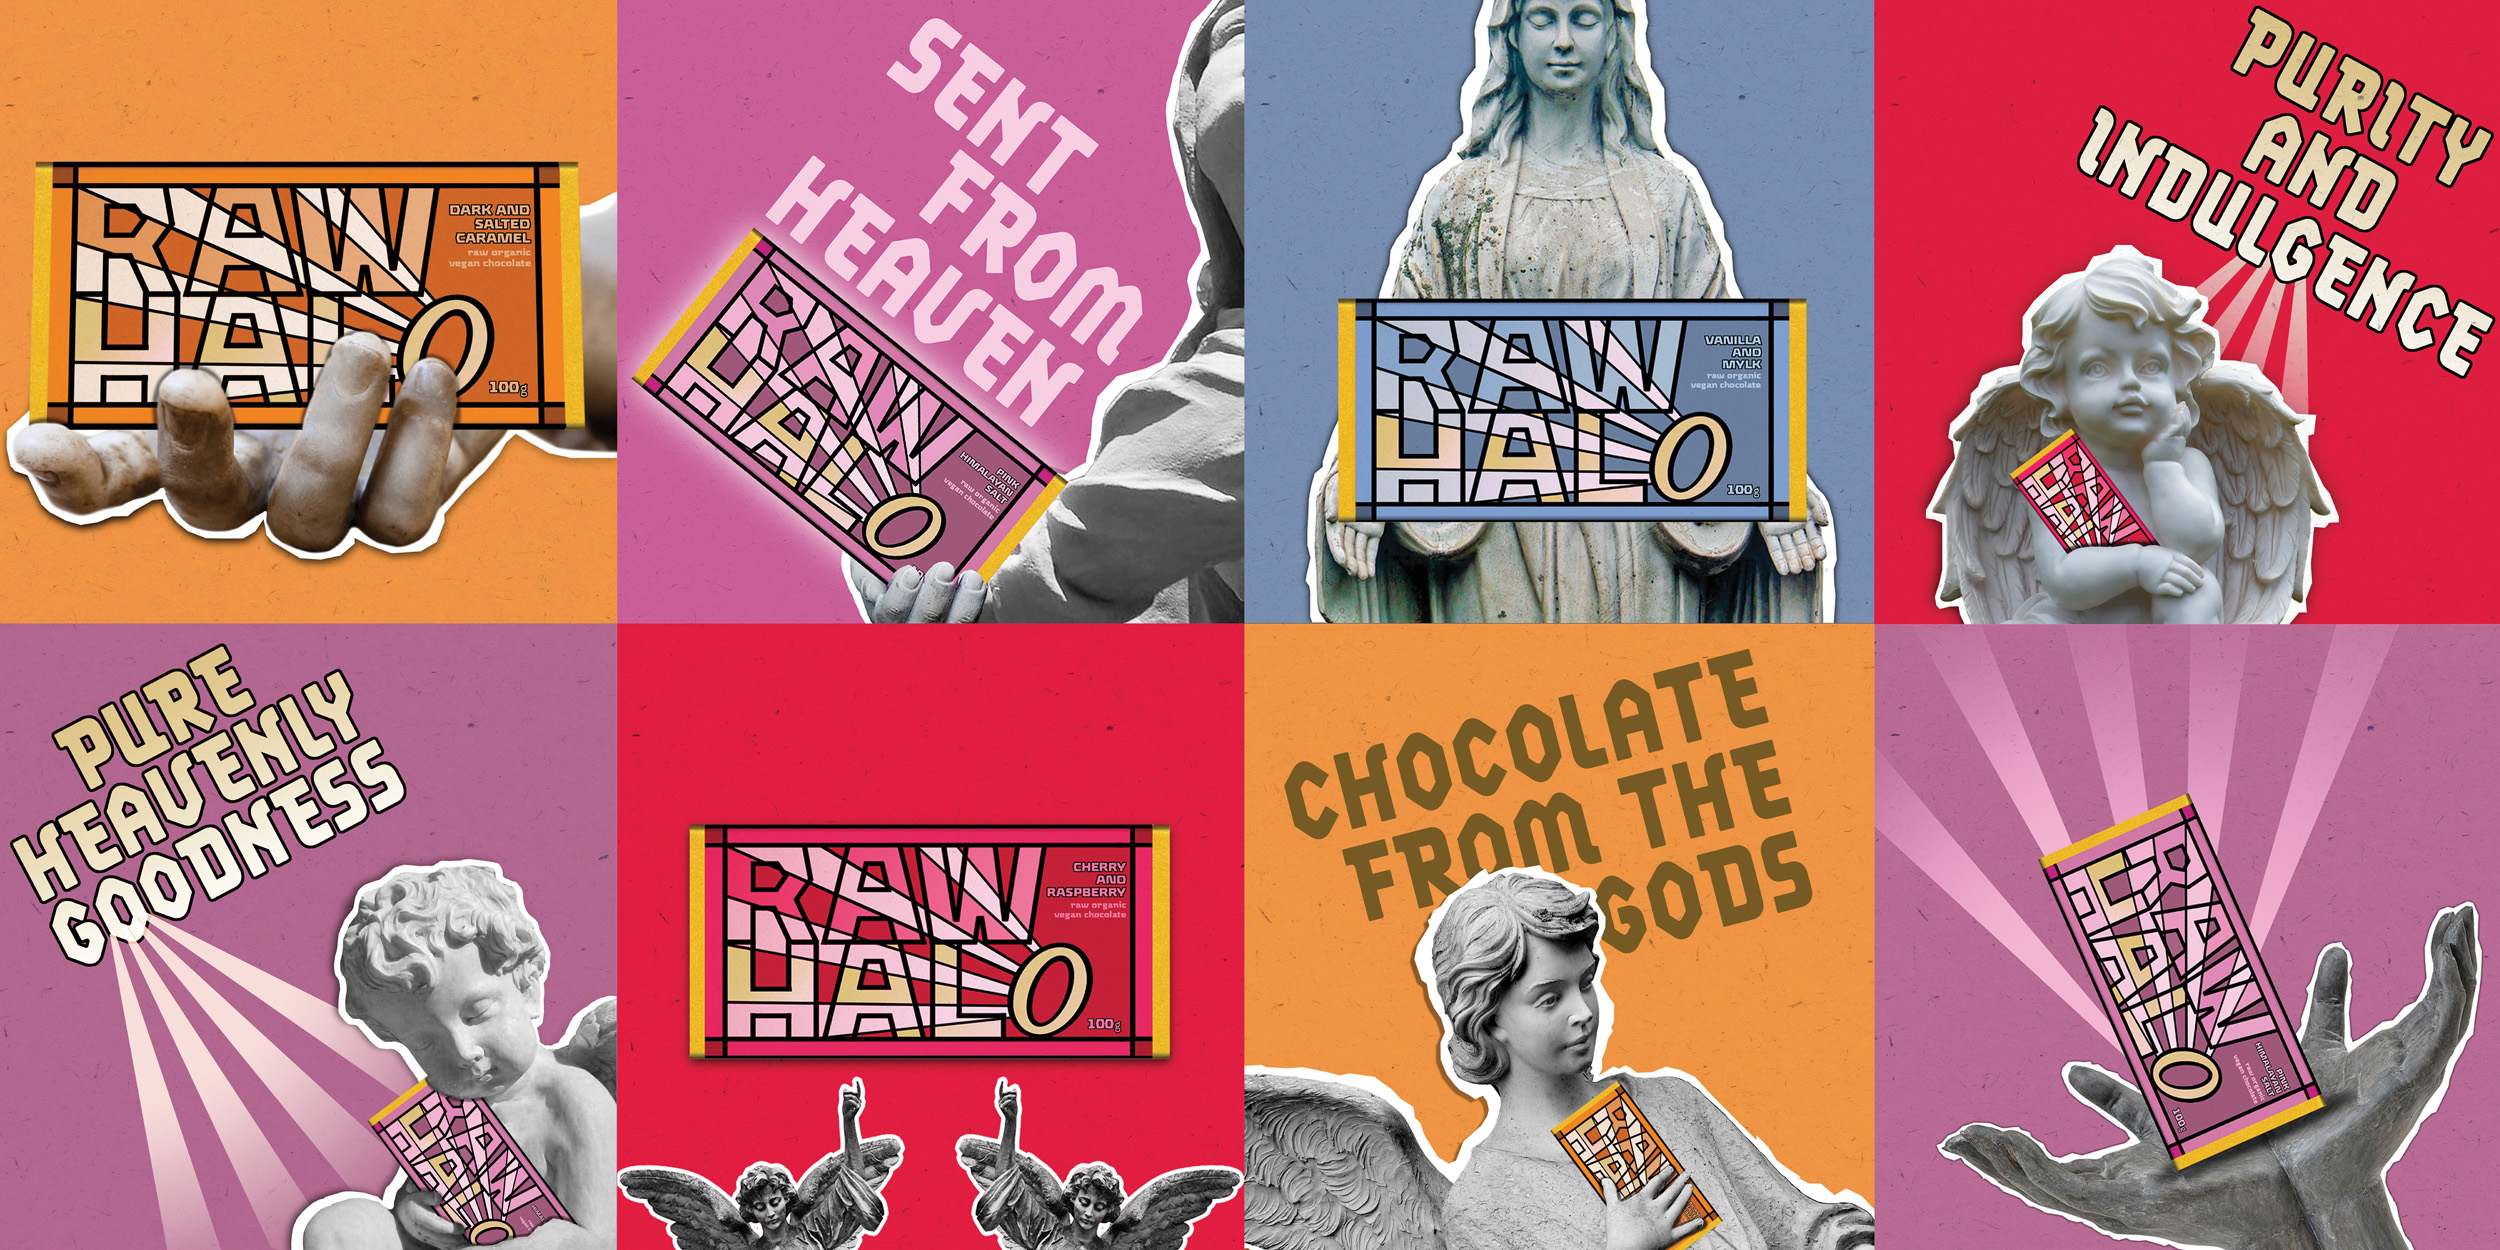 Design work by Cian Paige, showcasing the new vibrant and holy brand world for Raw Halo.